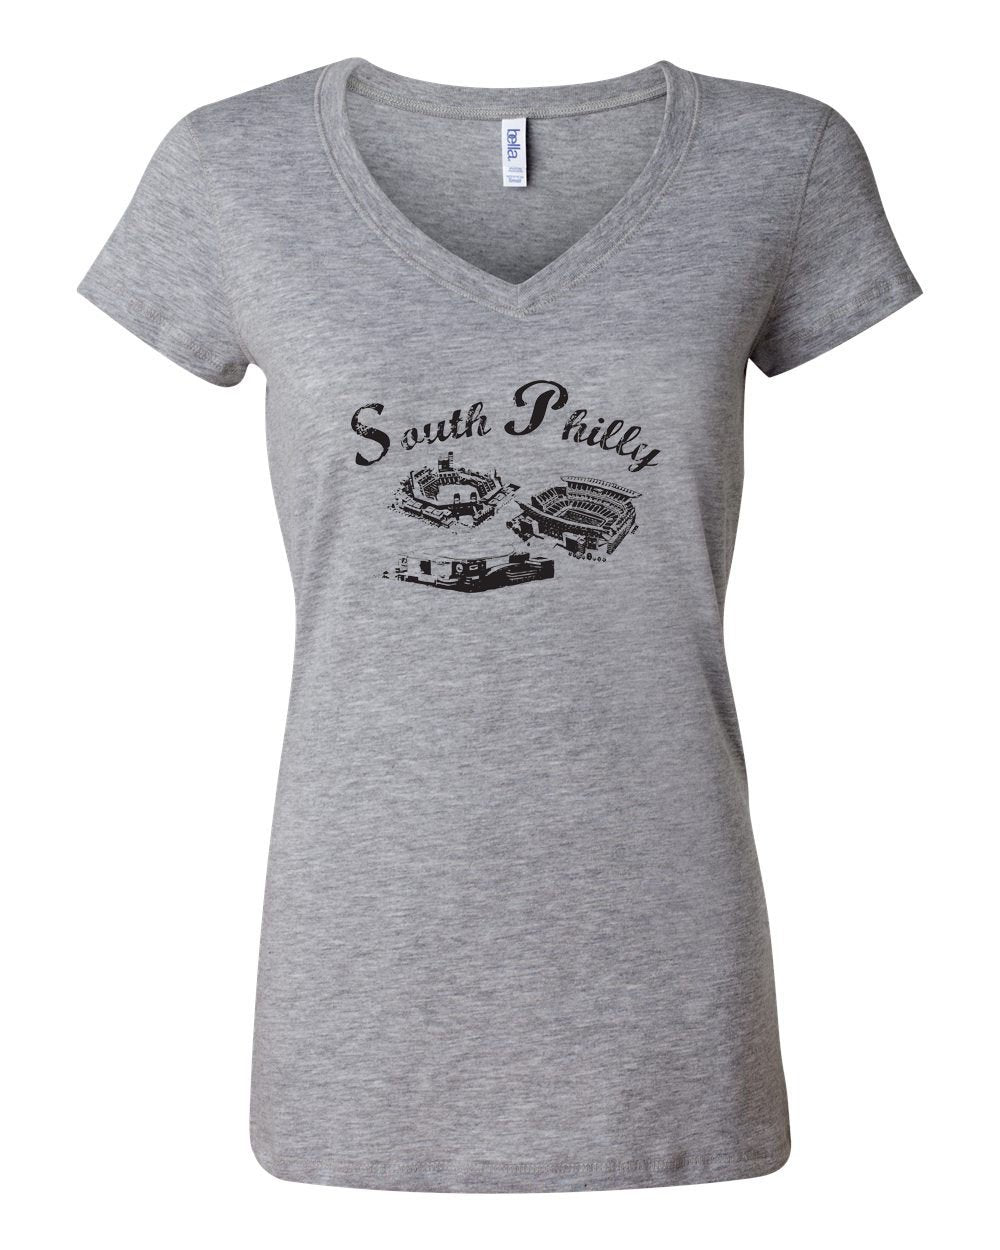 South Philly LADIES Junior Fit V-Neck